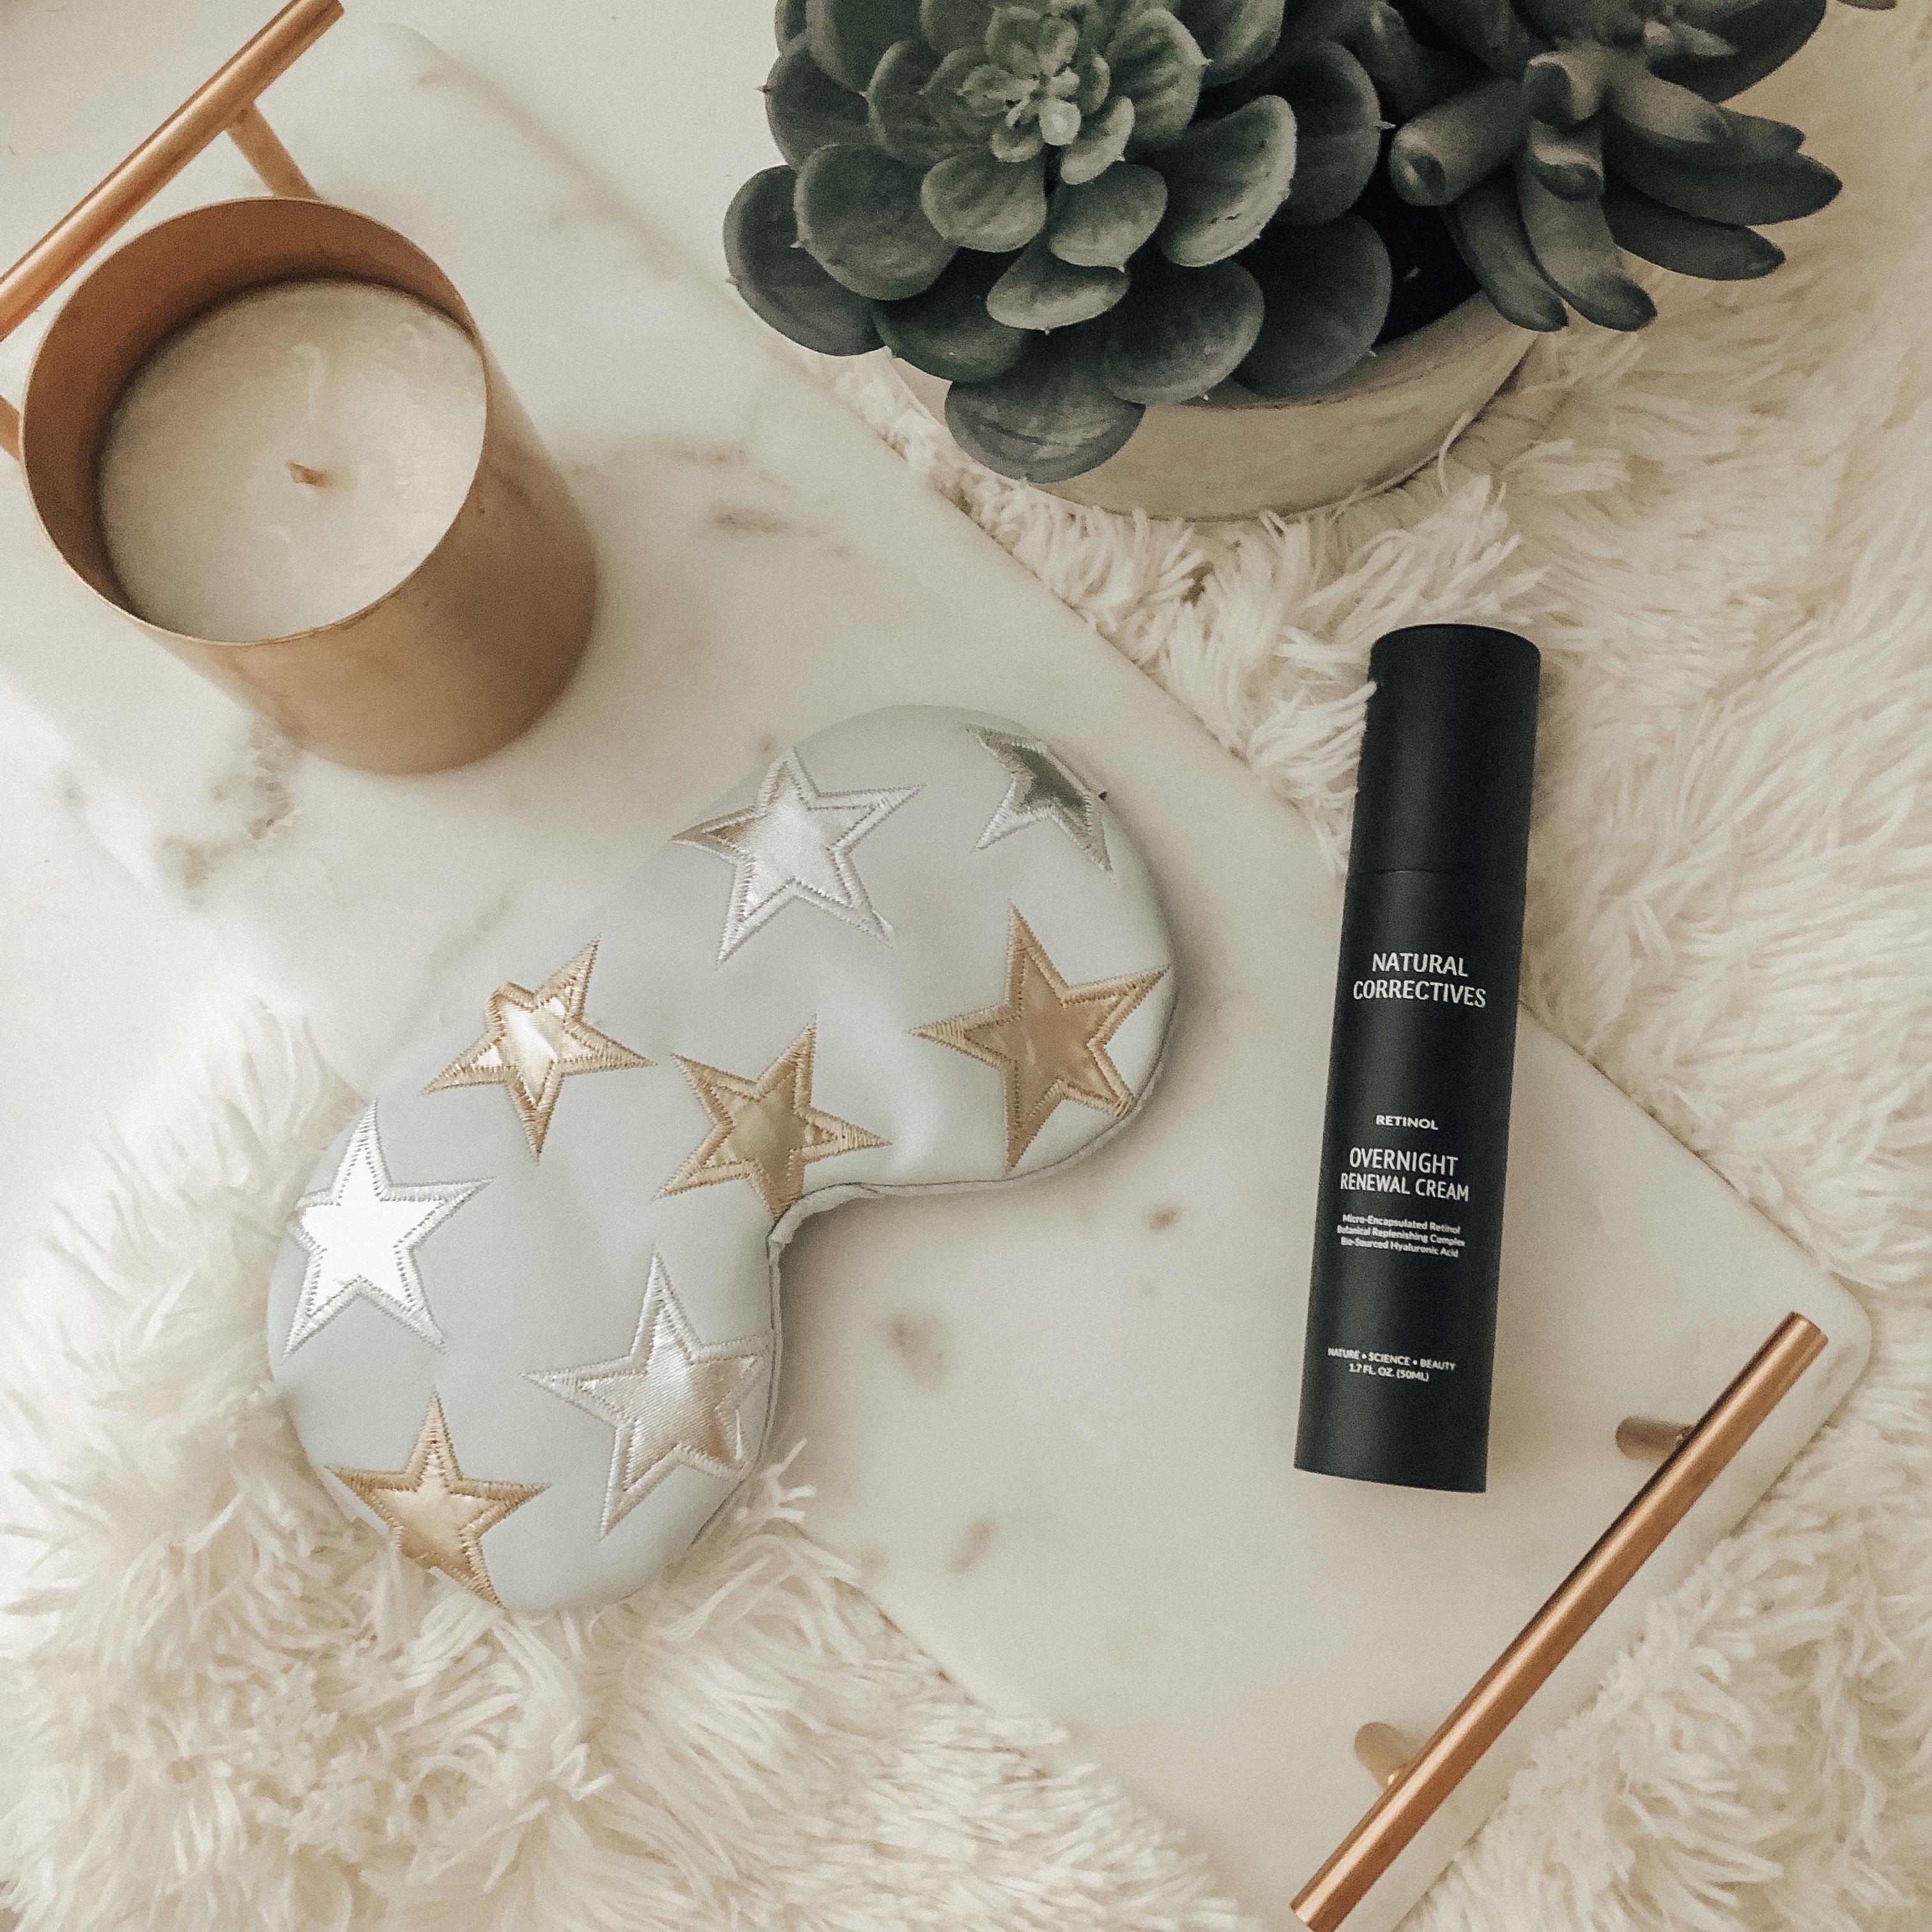 ADDING NATURAL CORRECTIVES RENEWAL CREAM TO MY NIGHTTIME ROUTINE- Jaclyn De Leon Style + beauty tips + retinol cream + skin care + anti aging cream +beauty secrets + natural anti aging and soothing ingredients + products to use + bedtime routine